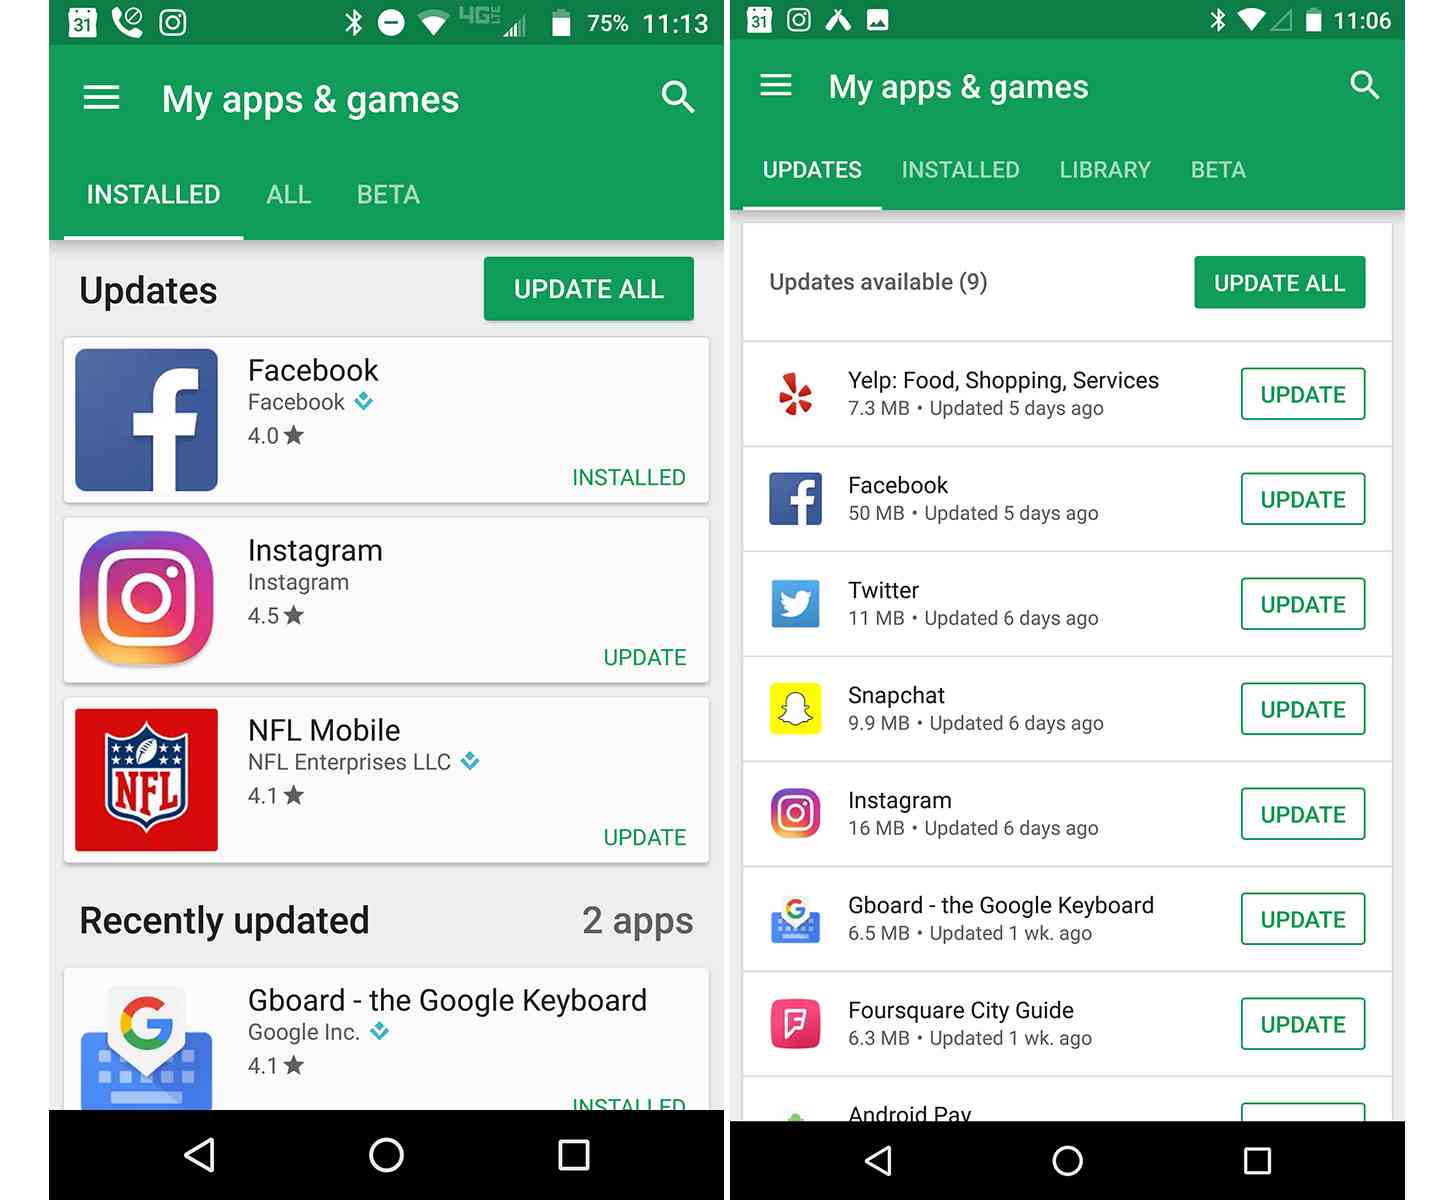 Google Play Store Android My apps & games updated design old new comparison